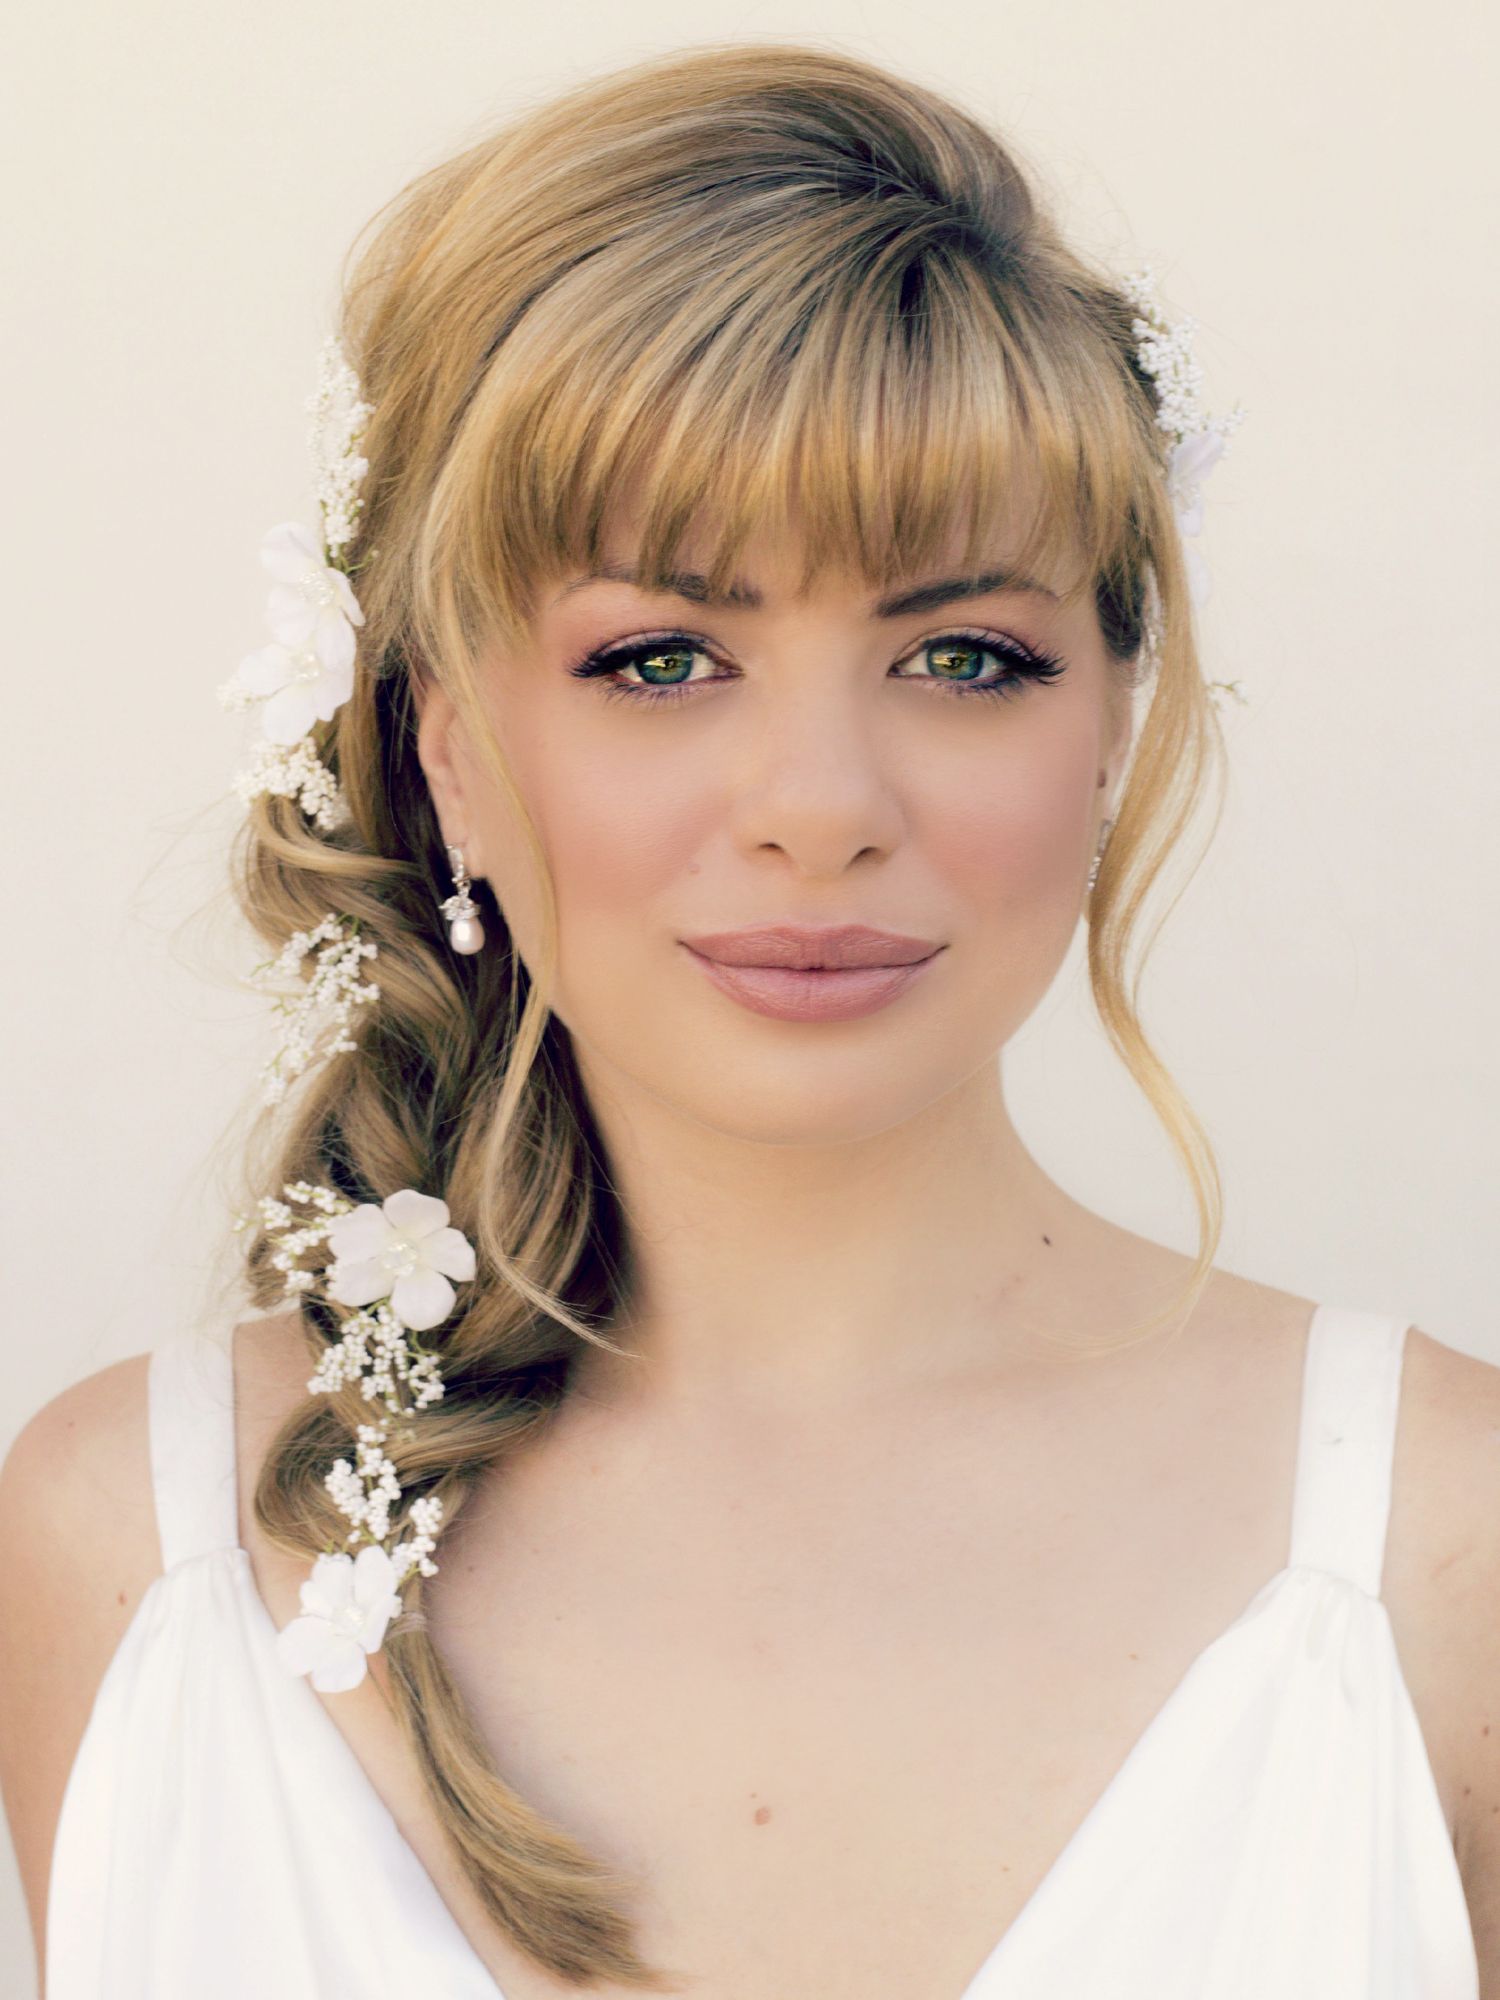 Loose Braid and Front Bang Ornamented with Hair Accessory